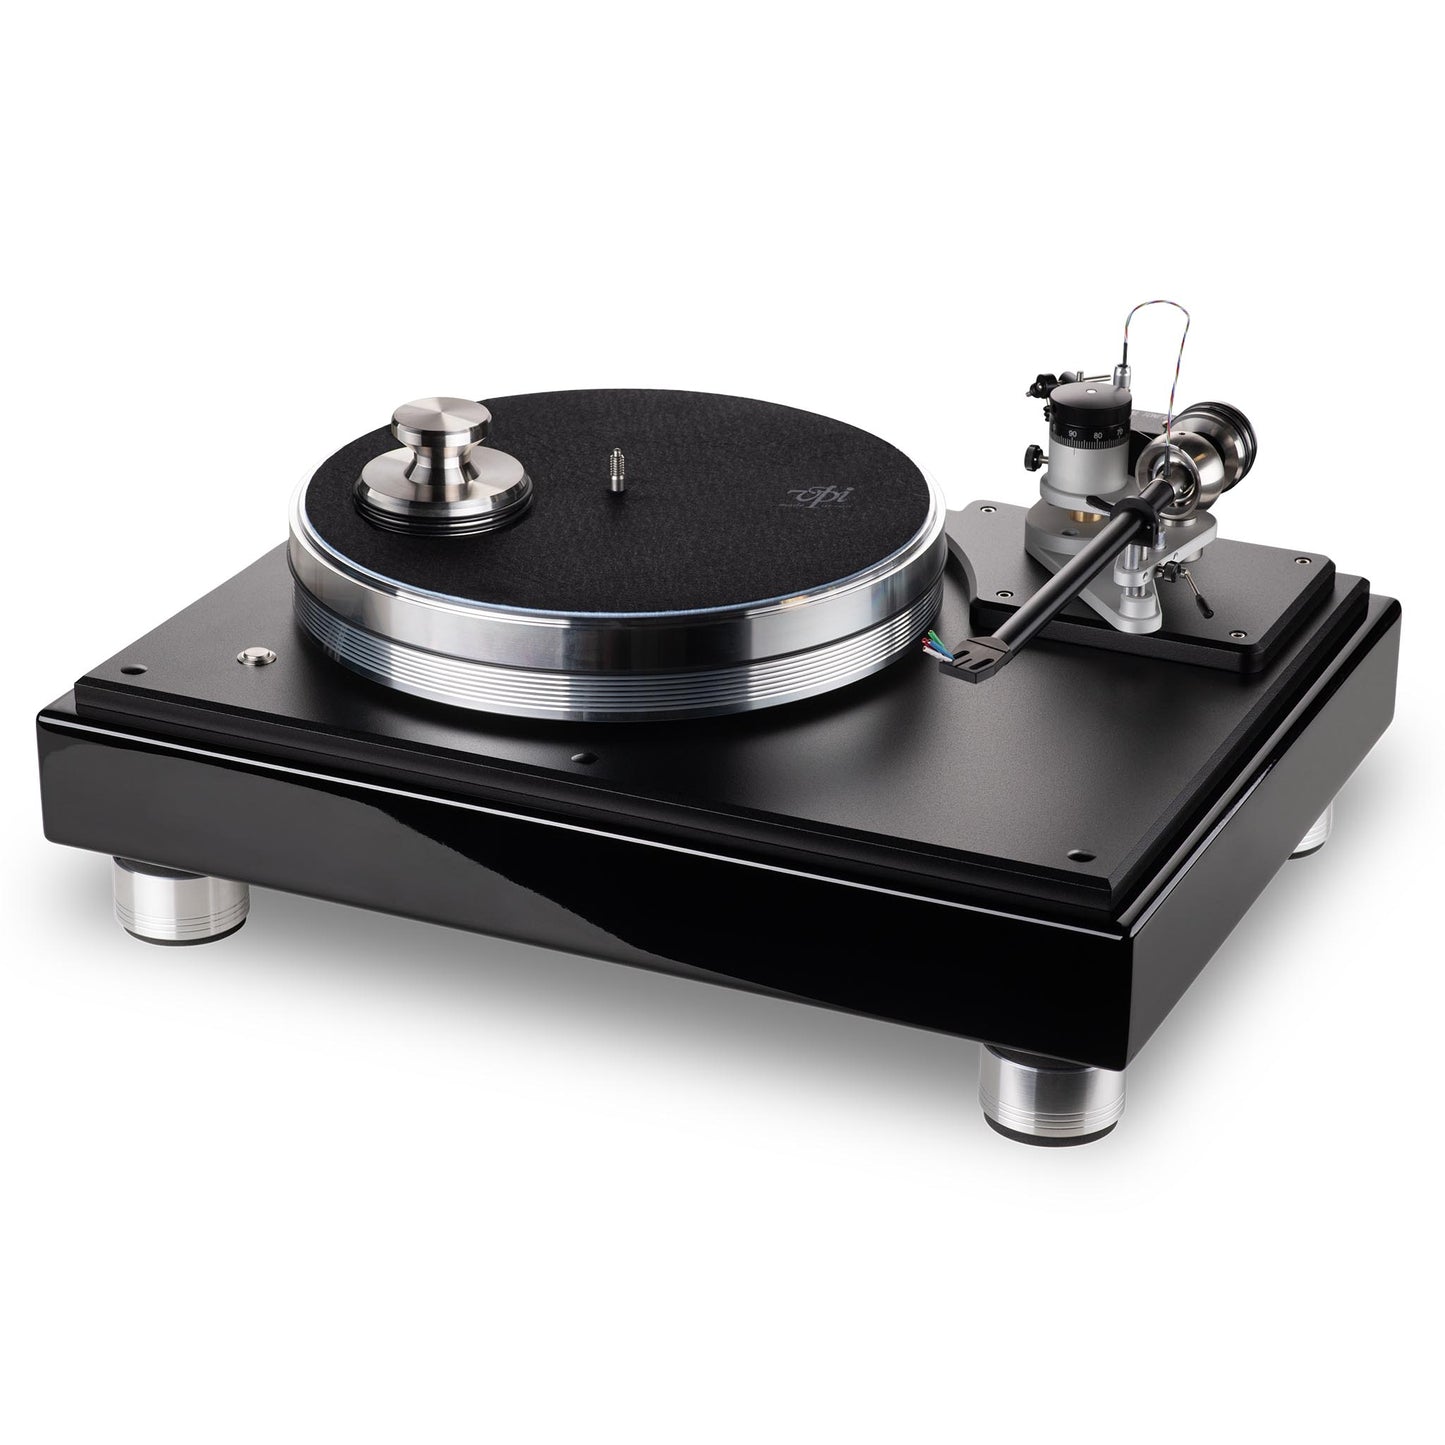 VPI Classic Signature HW Plus with JMW 10-3D Reference Gimbaled Tonearm